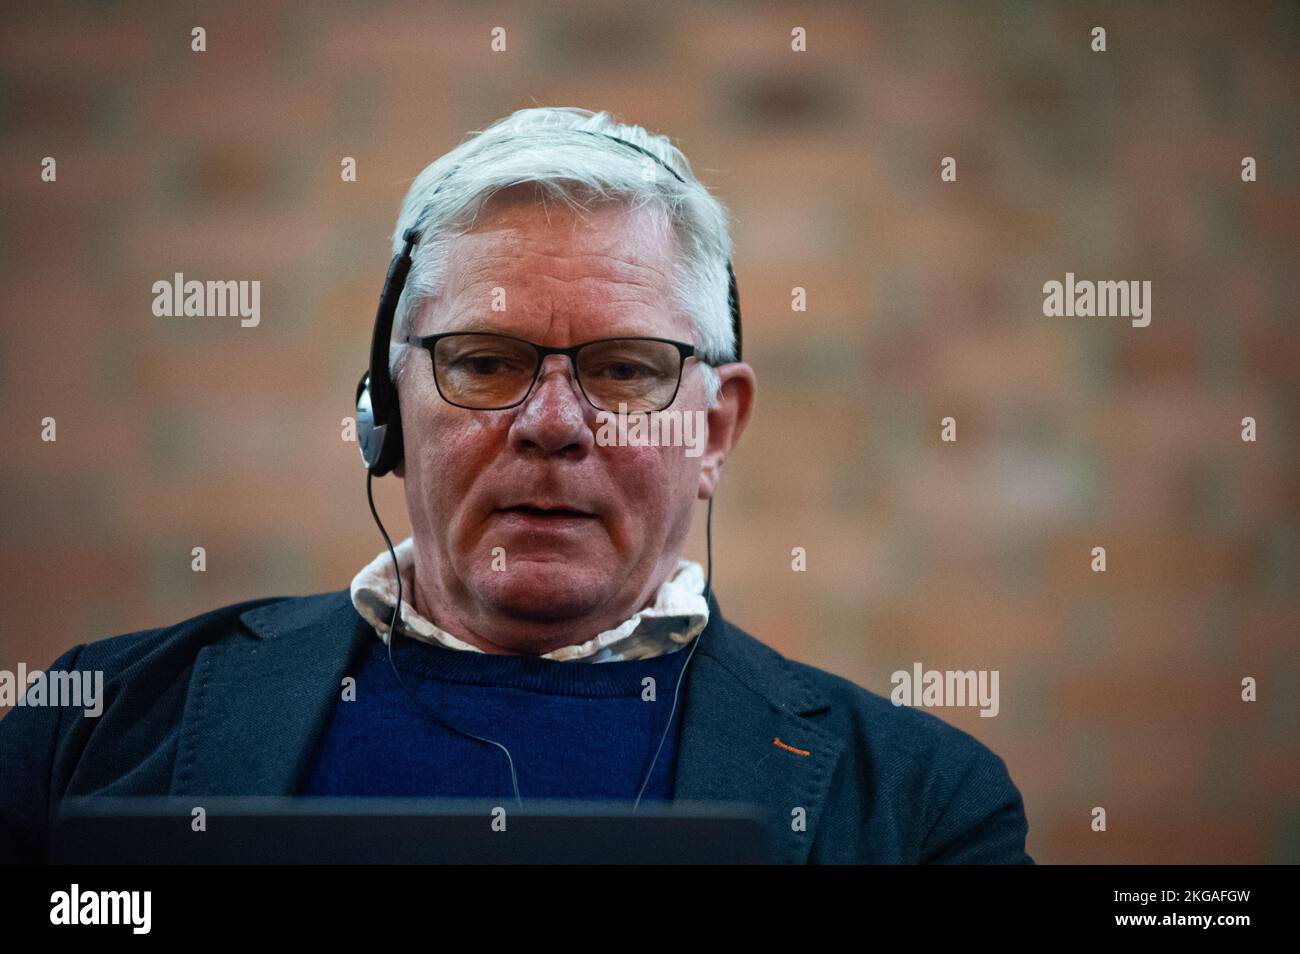 Bogota, Colombia, November 22, 2022. Kristinn Hrafnsson, chief editor of WikiLeaks speaks during a discussion on freedom of expression at Colombia's National University, in Bogota, Colombia, November 22, 2022. Stock Photo